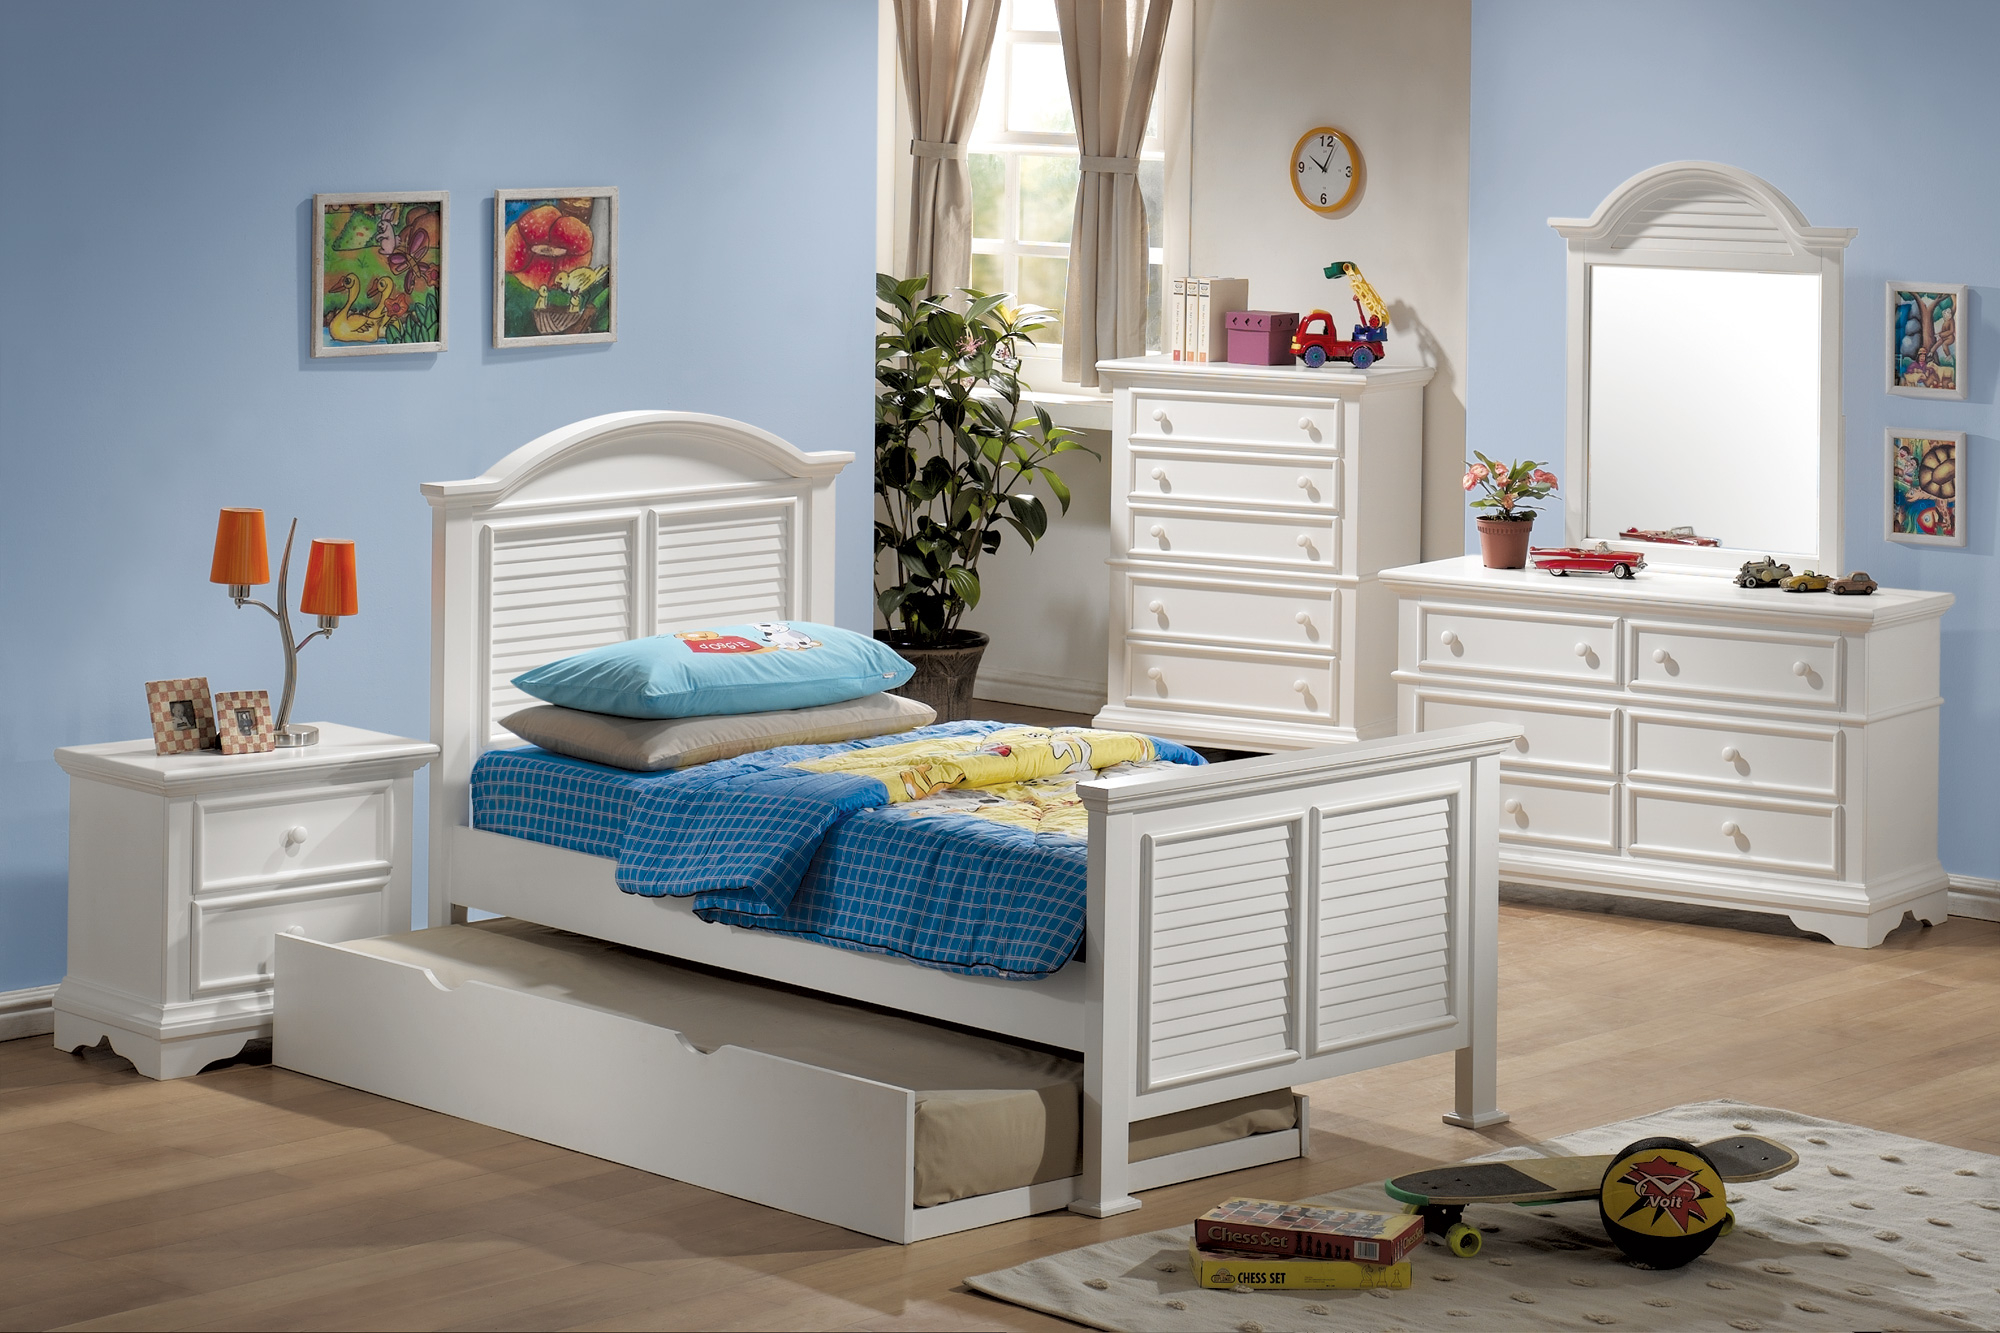 Coaster Furniture Merlin Collection White Bedroom Settwin Bed inside dimensions 2000 X 1333